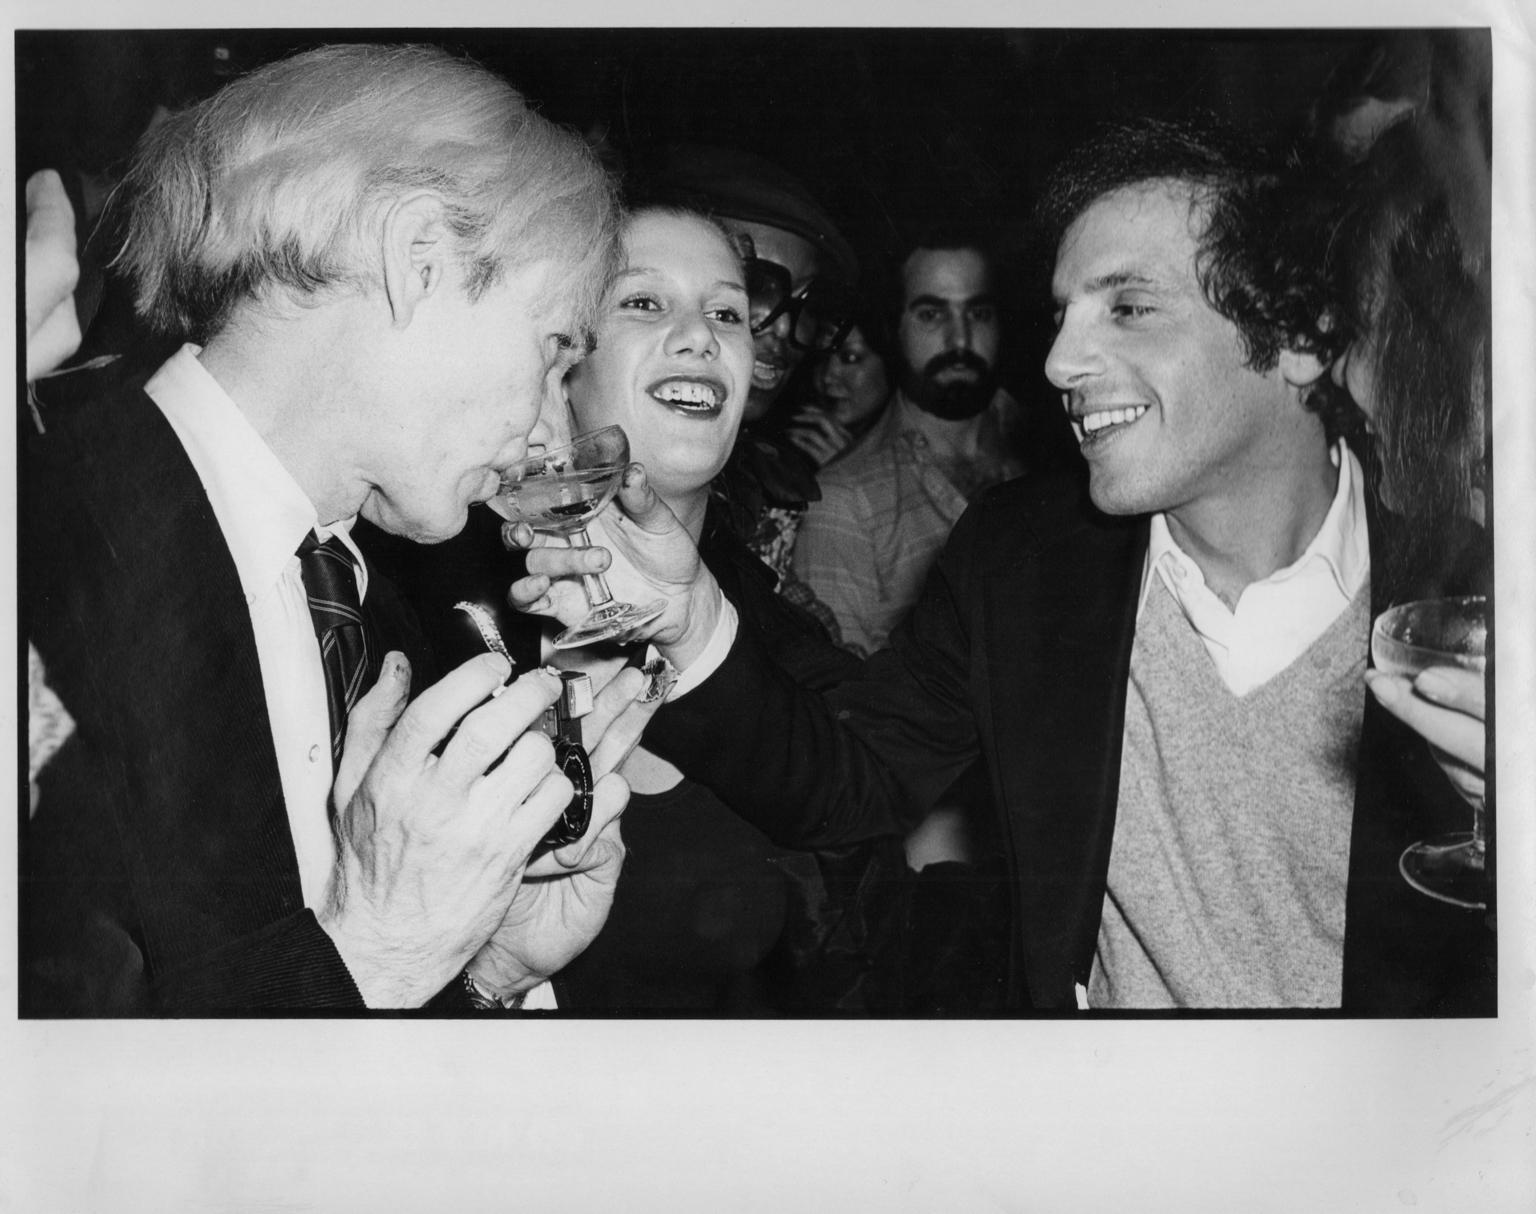 Allan Tannenbaum Black and White Photograph - Steve Rubell Gives Andy Warhol a Drink at Studio 54 - Gel Silver Vintage Print